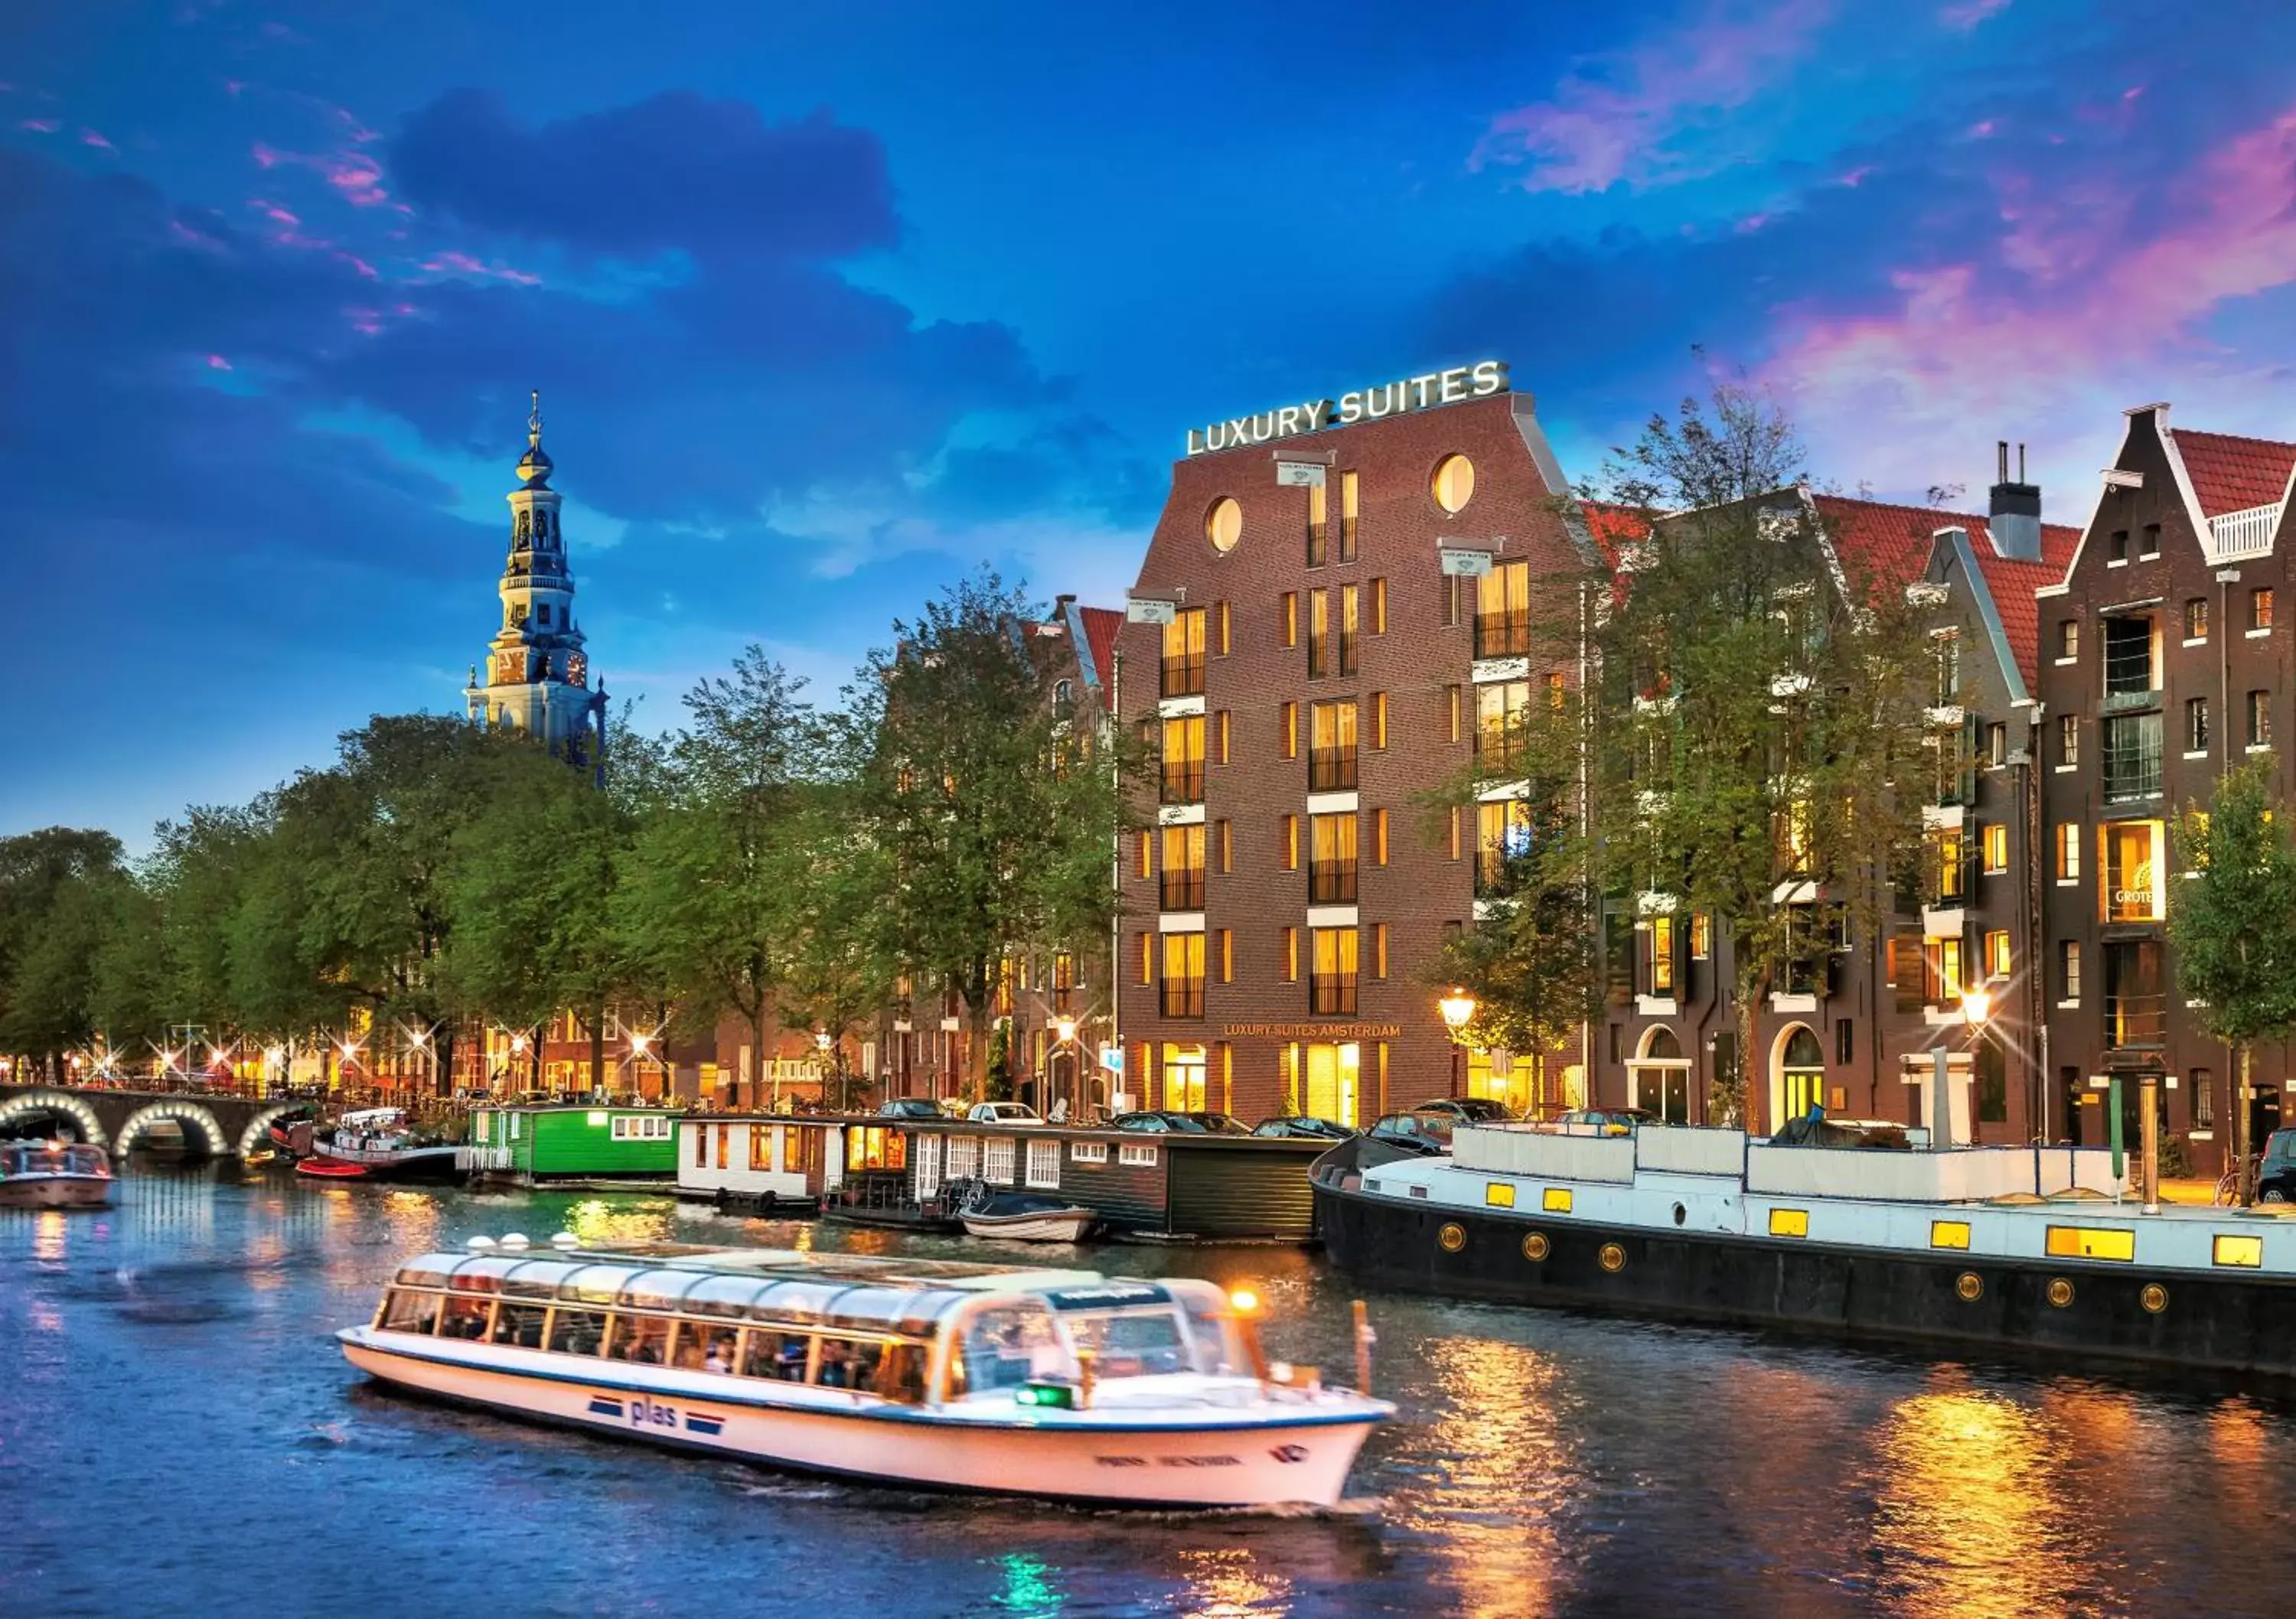 Property building in Luxury Suites Amsterdam